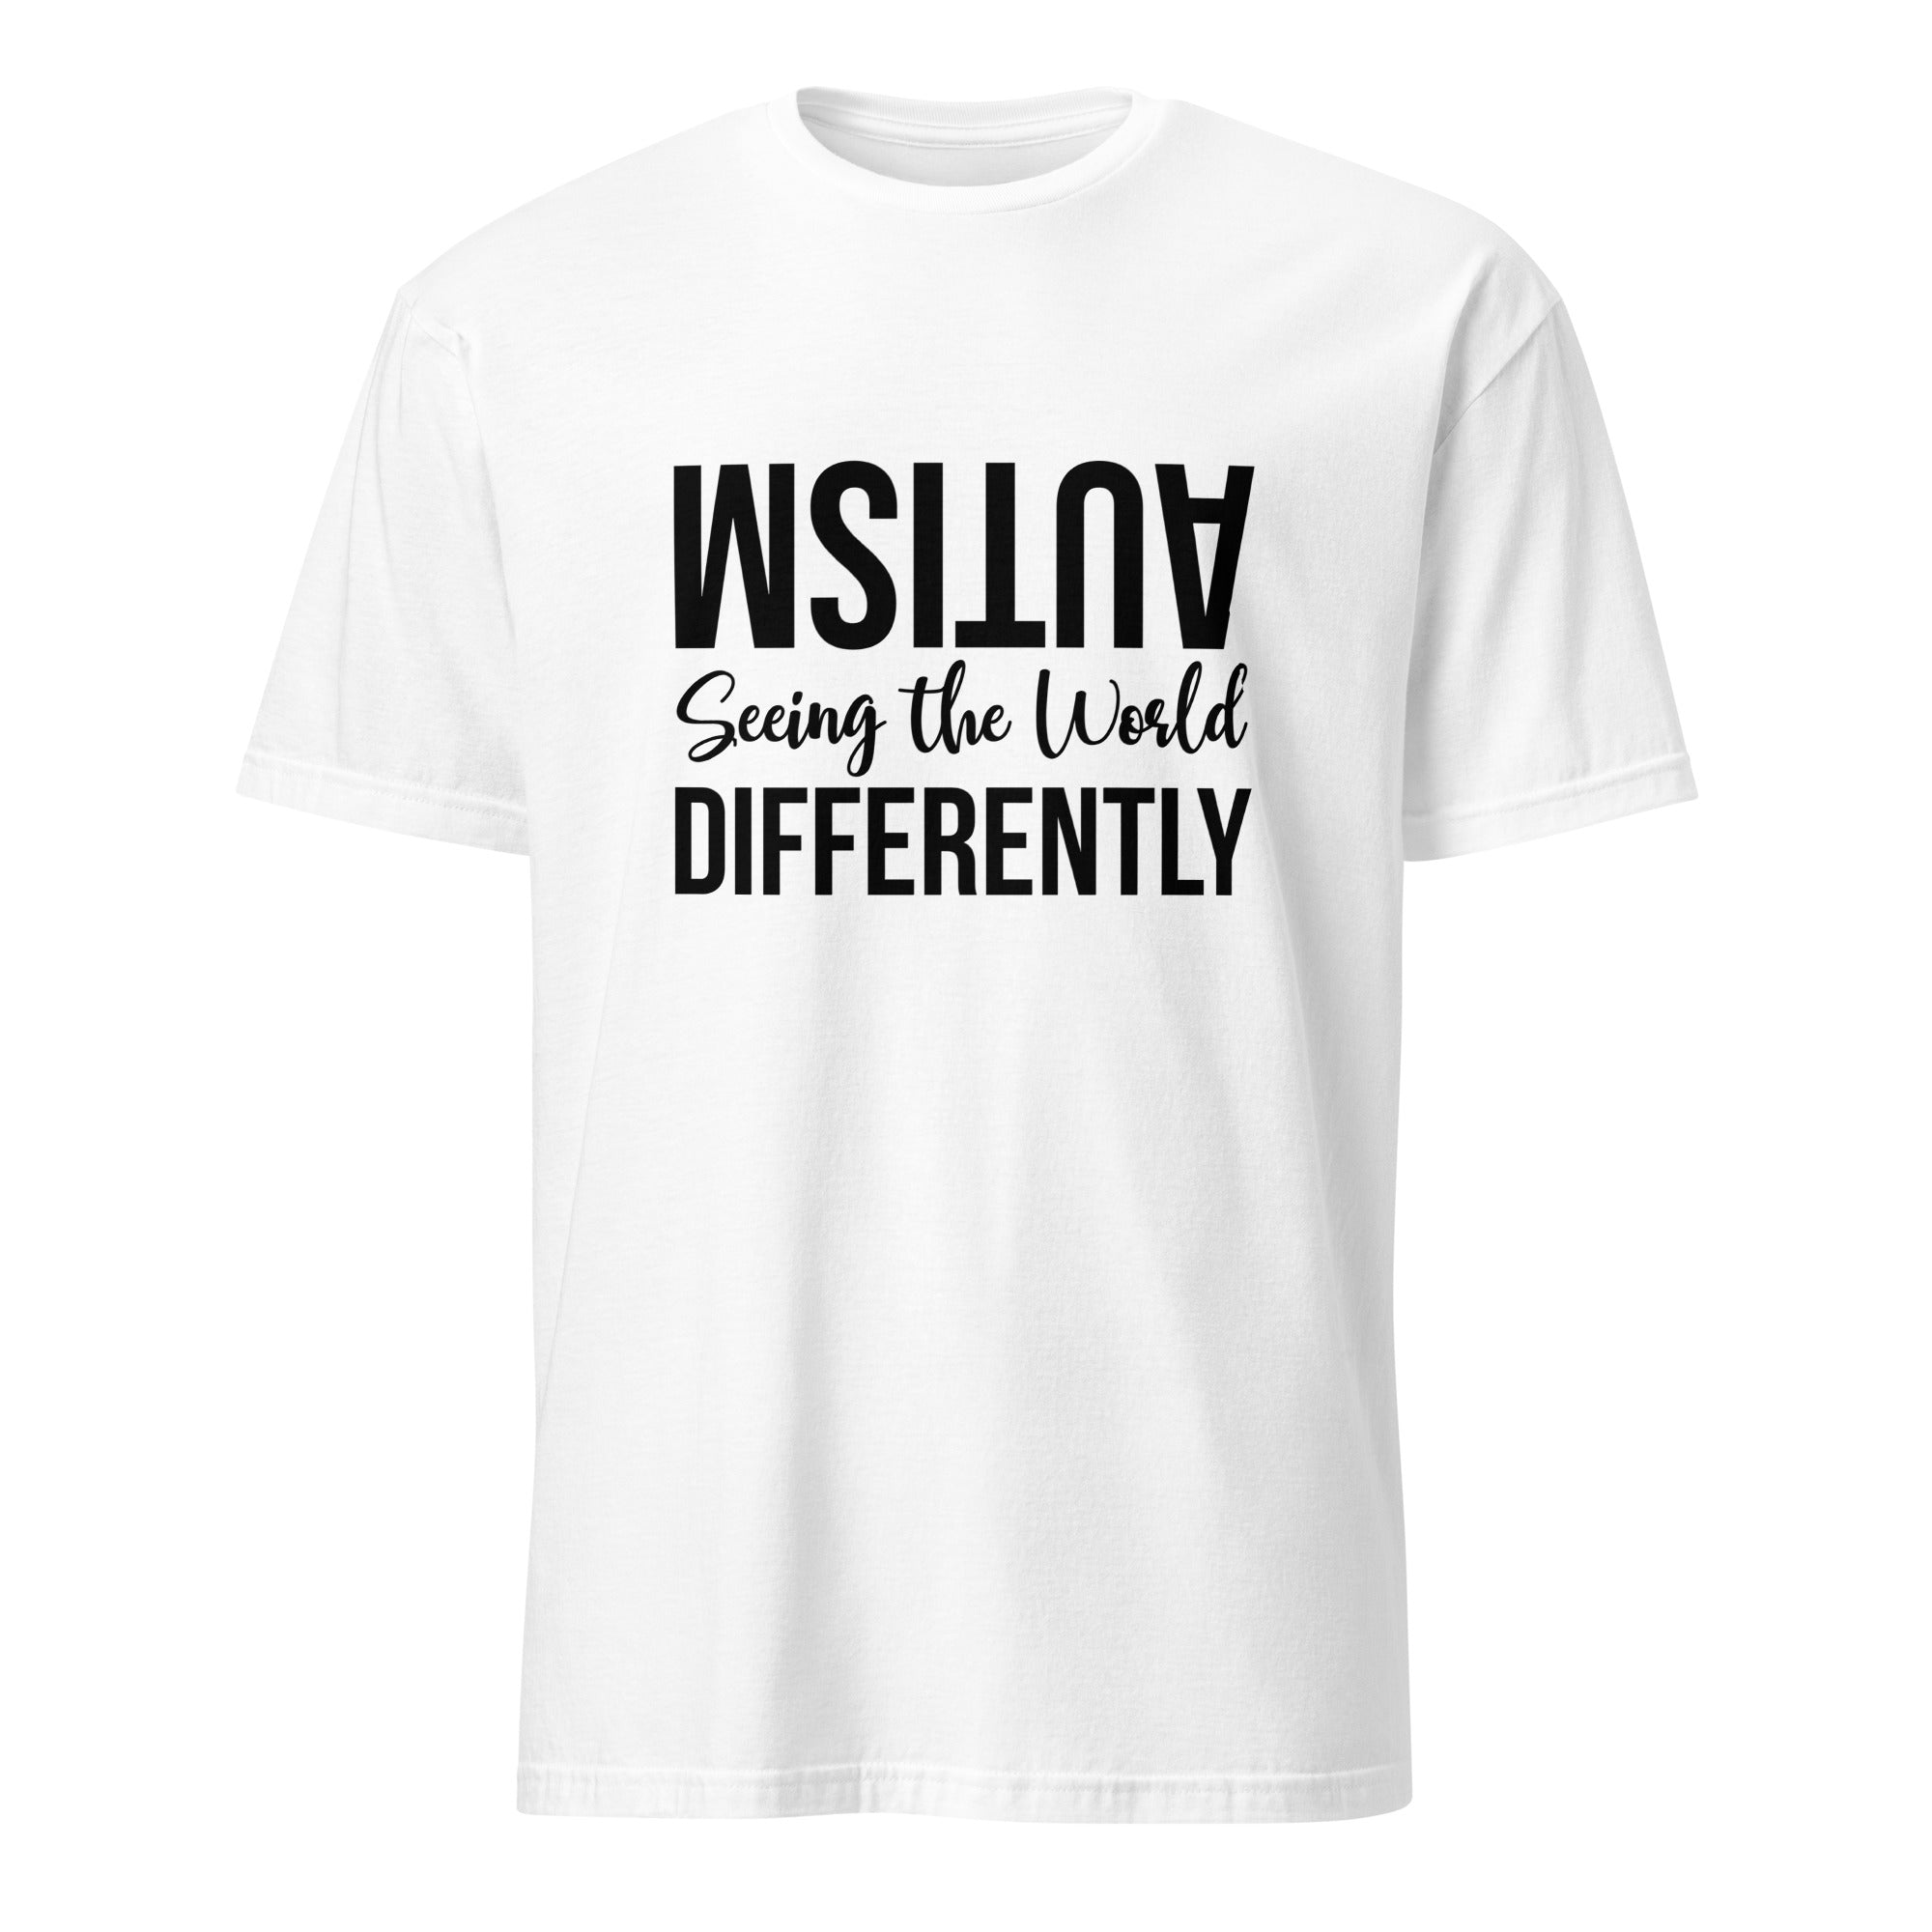 Short-Sleeve Unisex T-Shirt- Autism Seeing the World Differently